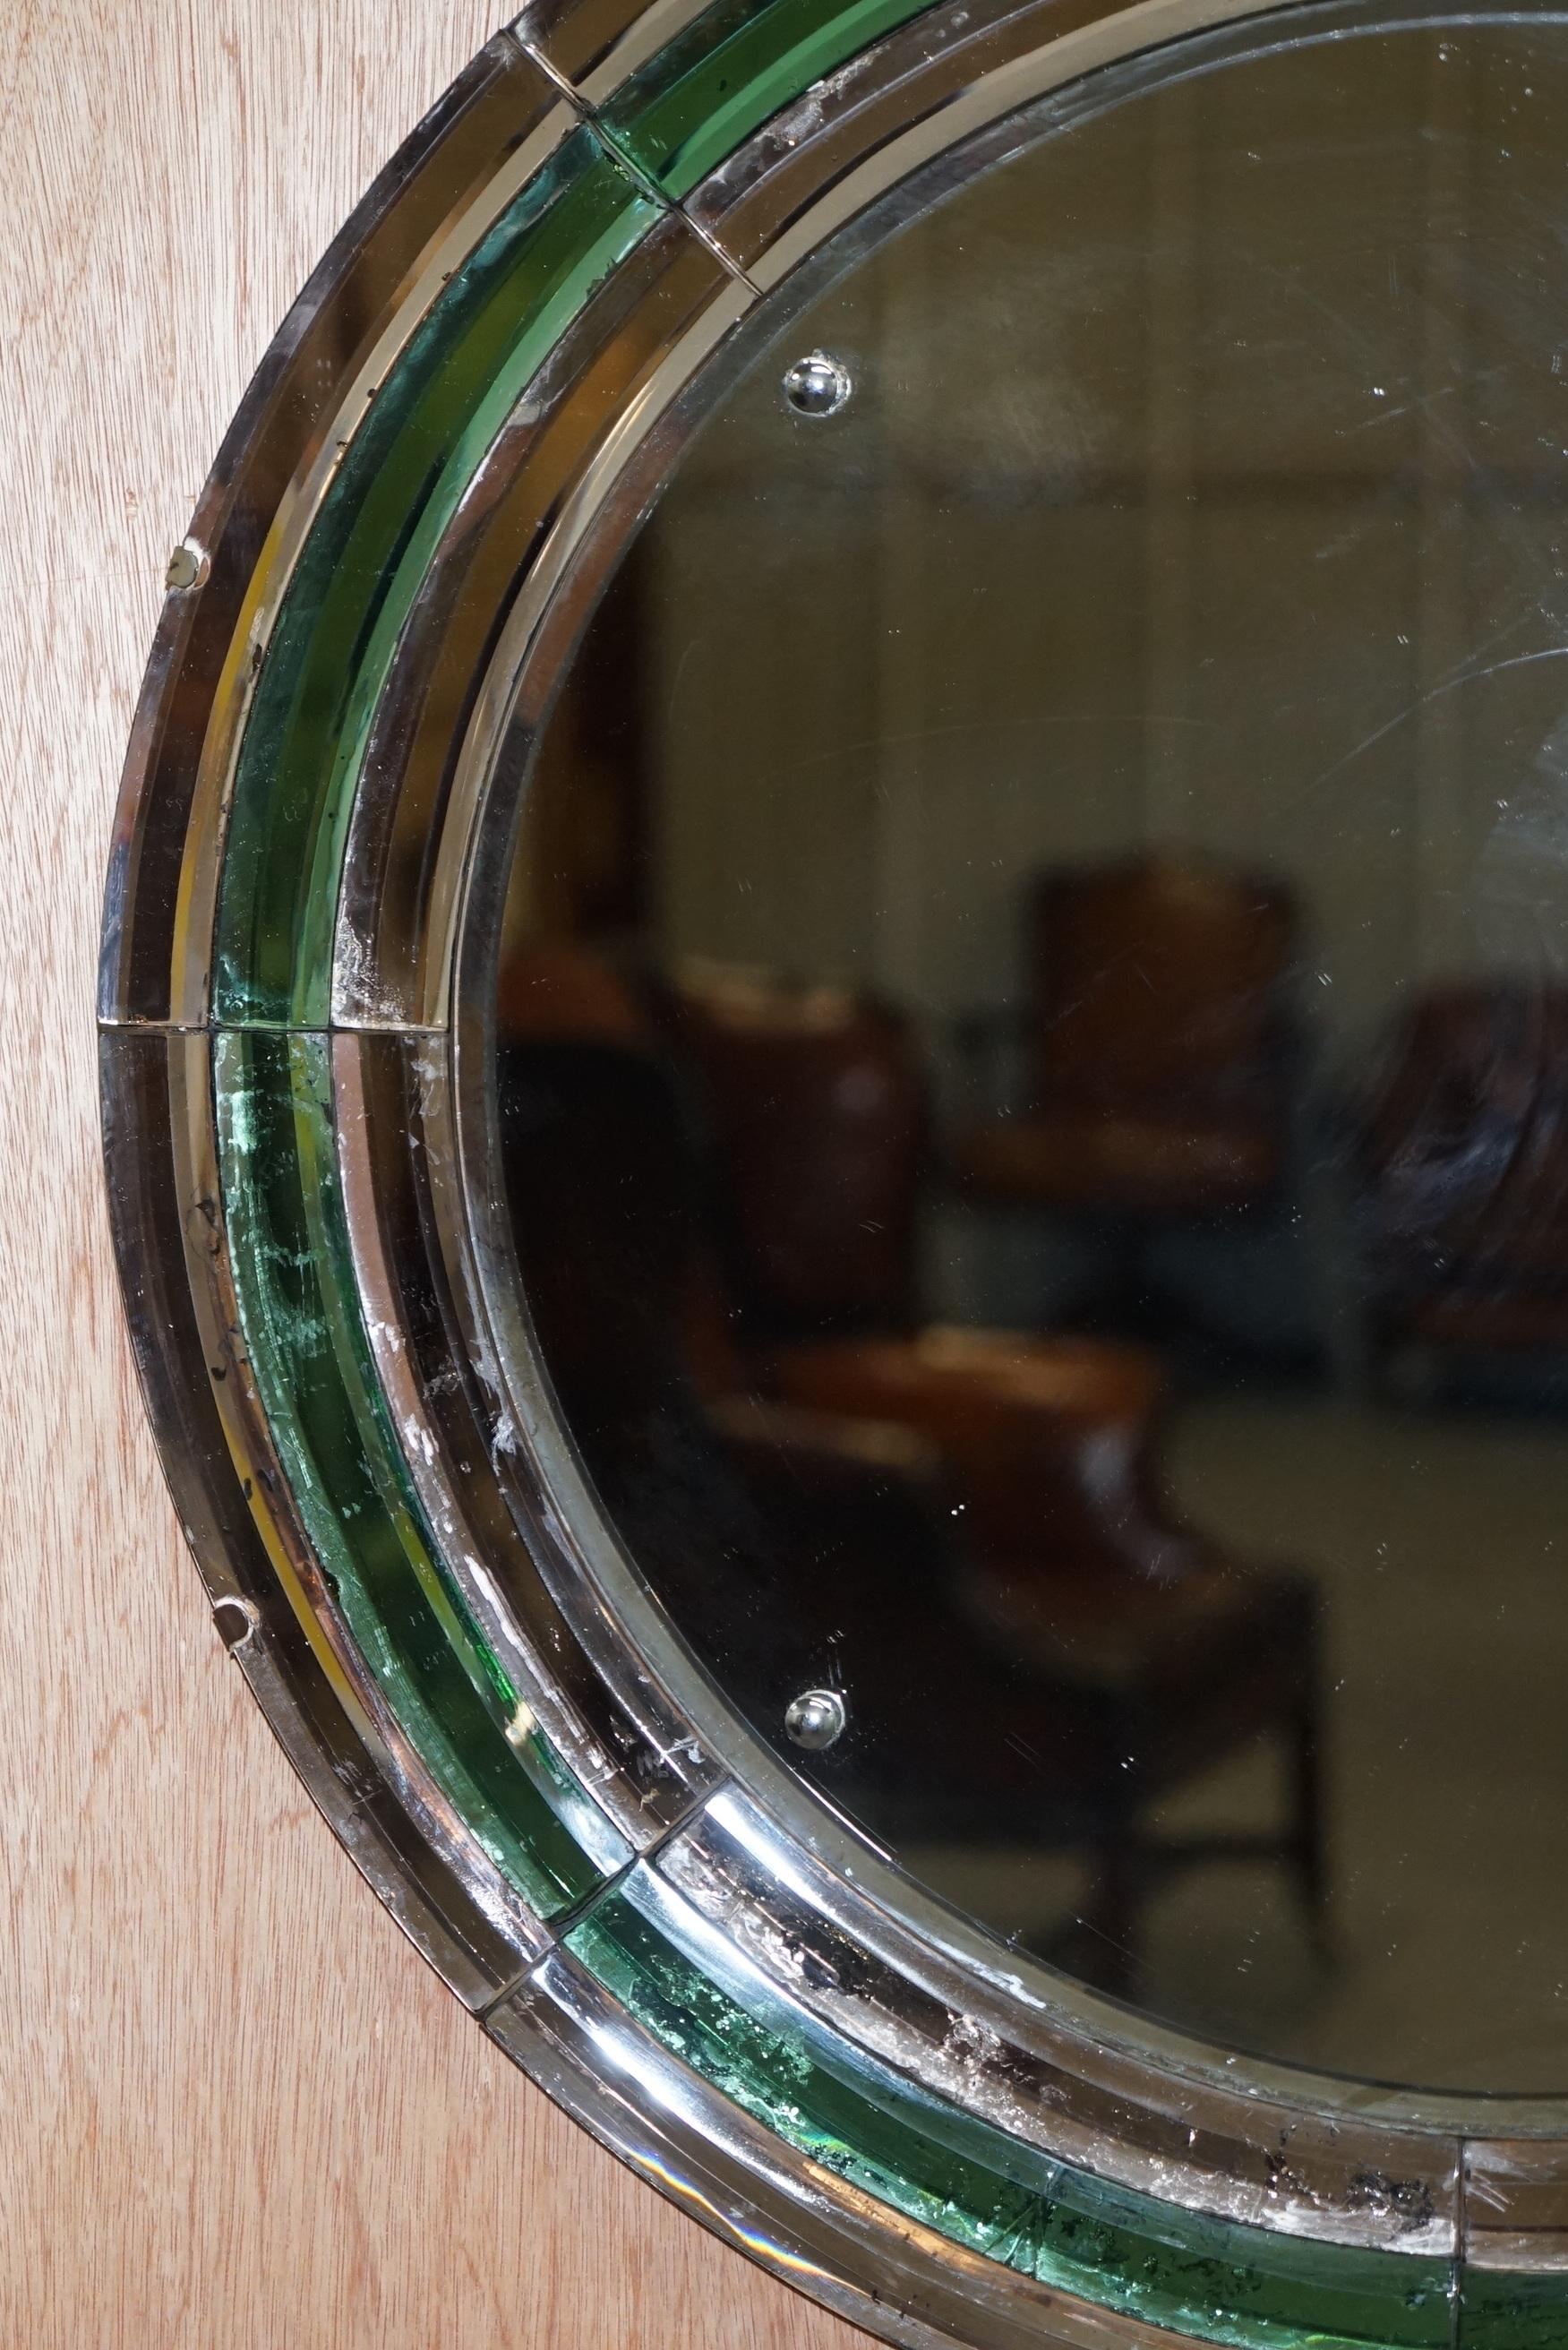 We are delighted to this exceptionally rare and important Art Deco circa 1930s Peach and Murano Emerald glass round wall mirror

What a find, I have never seen a Murano emerald glass mirror before with the Art Deco peach glass mixed in as well and